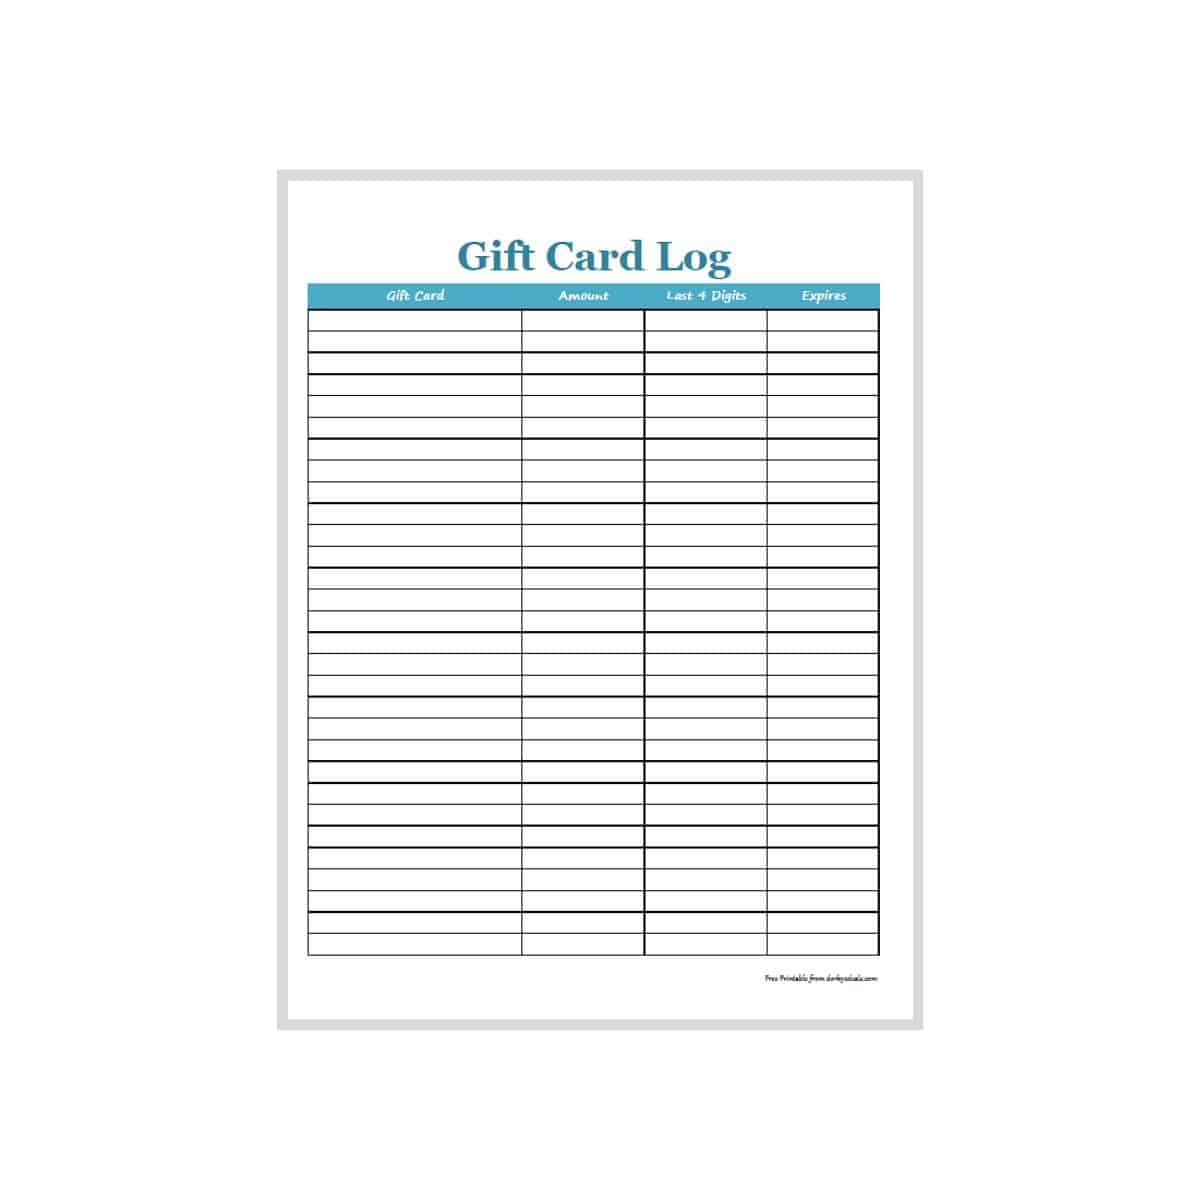 Gift Card Log with 4 columns: gift card, amount, last 4 digits, and expiration date.